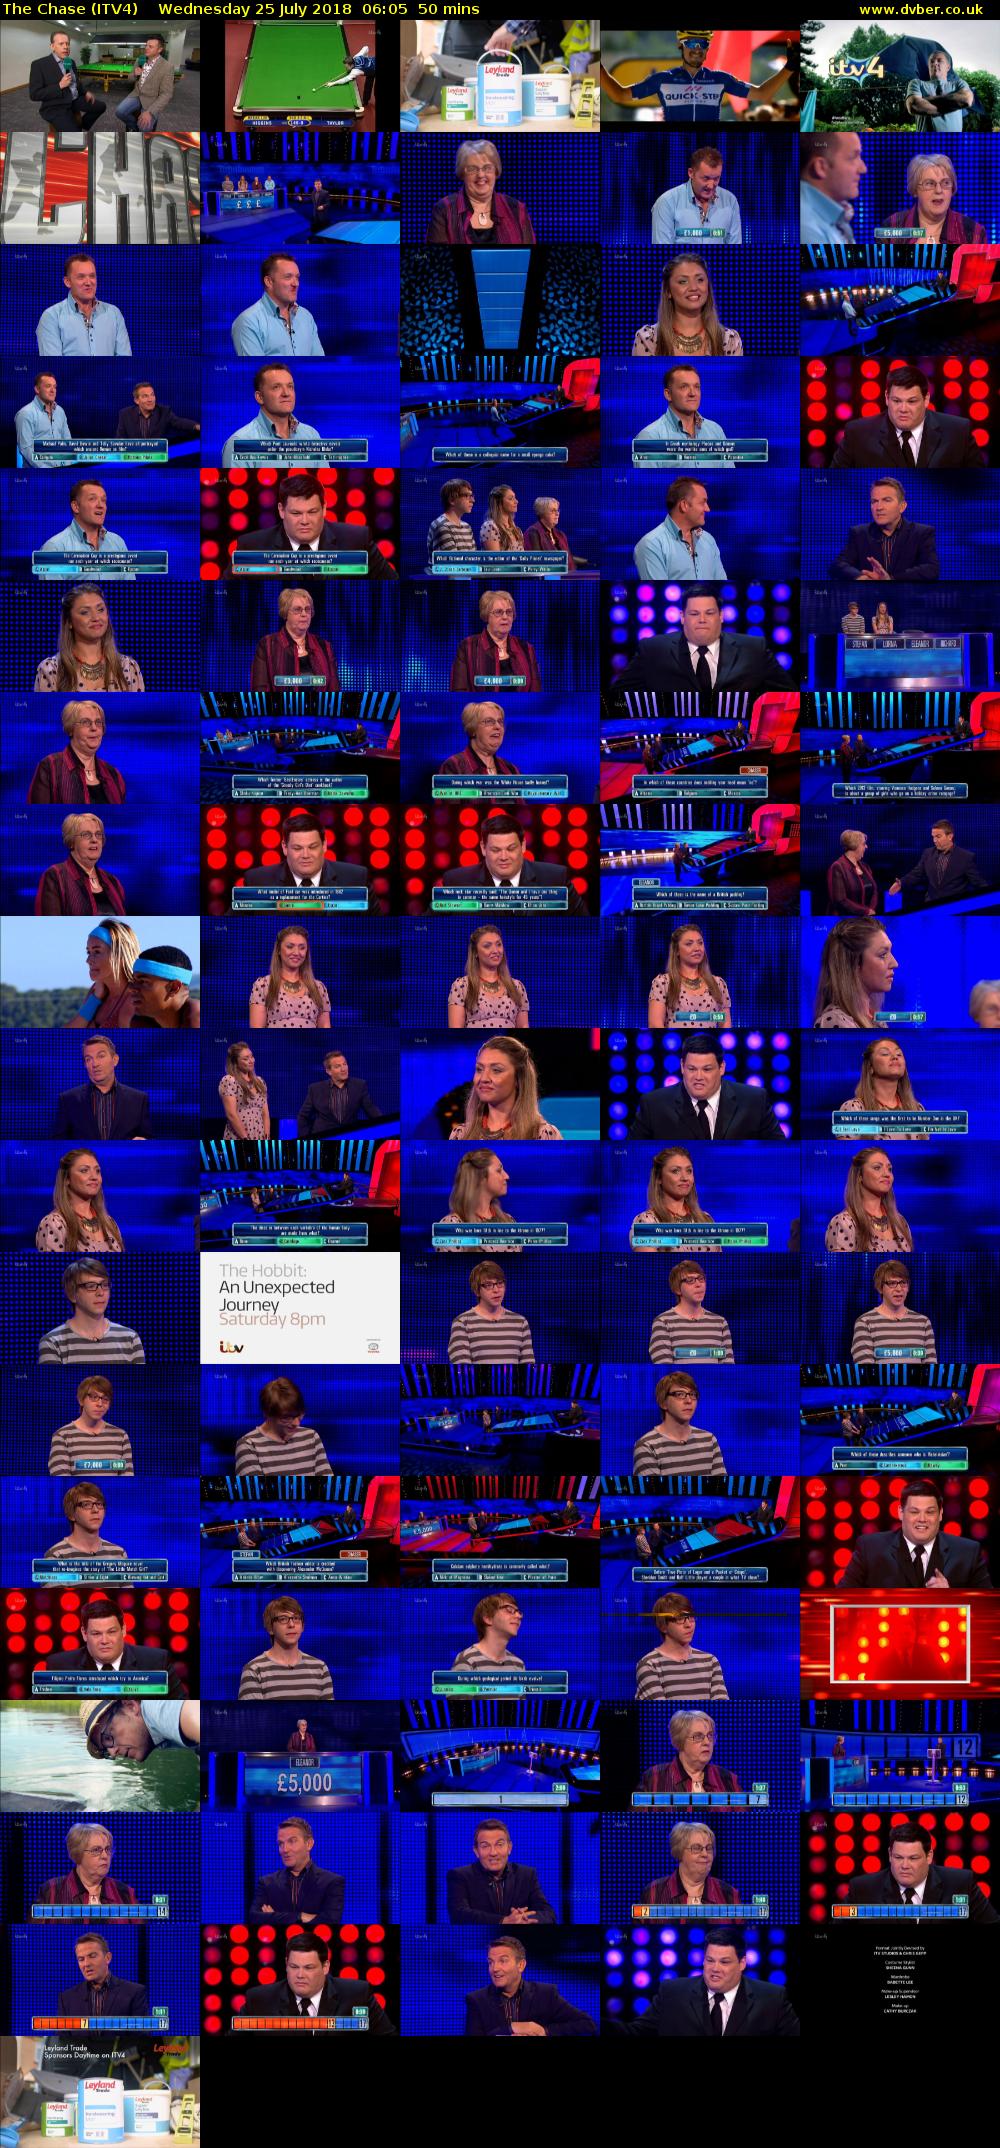 The Chase (ITV4) Wednesday 25 July 2018 06:05 - 06:55